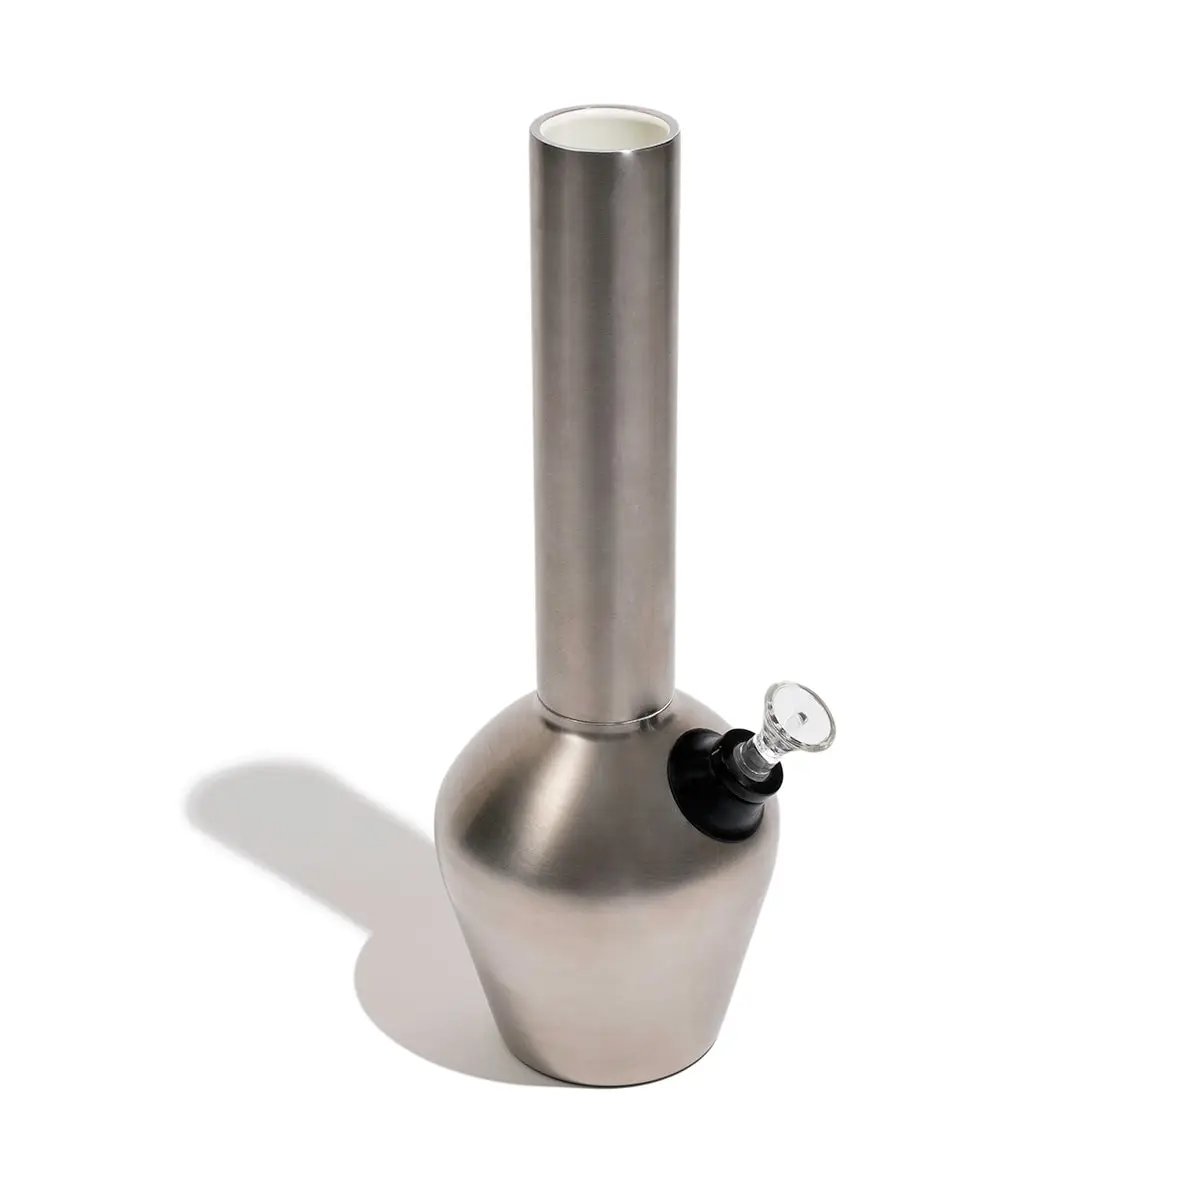 Chill – Stainless Steel – Chill Steel Pipes